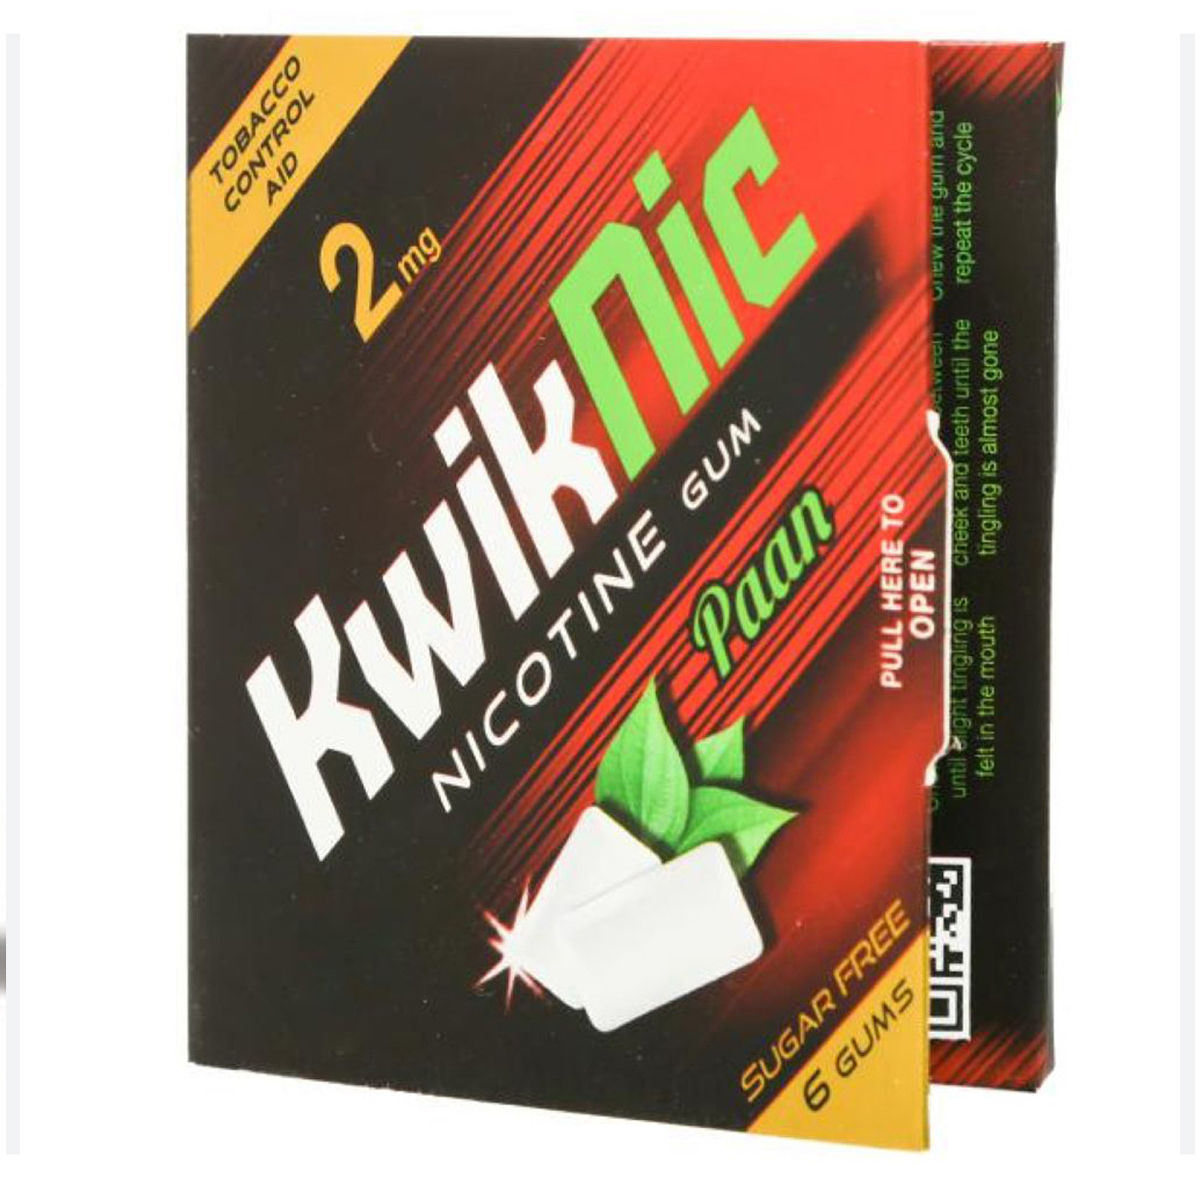 Kwiknic Nicotine 2 mg Paan Flavour, 6 Chewing Gum, Pack of 1 